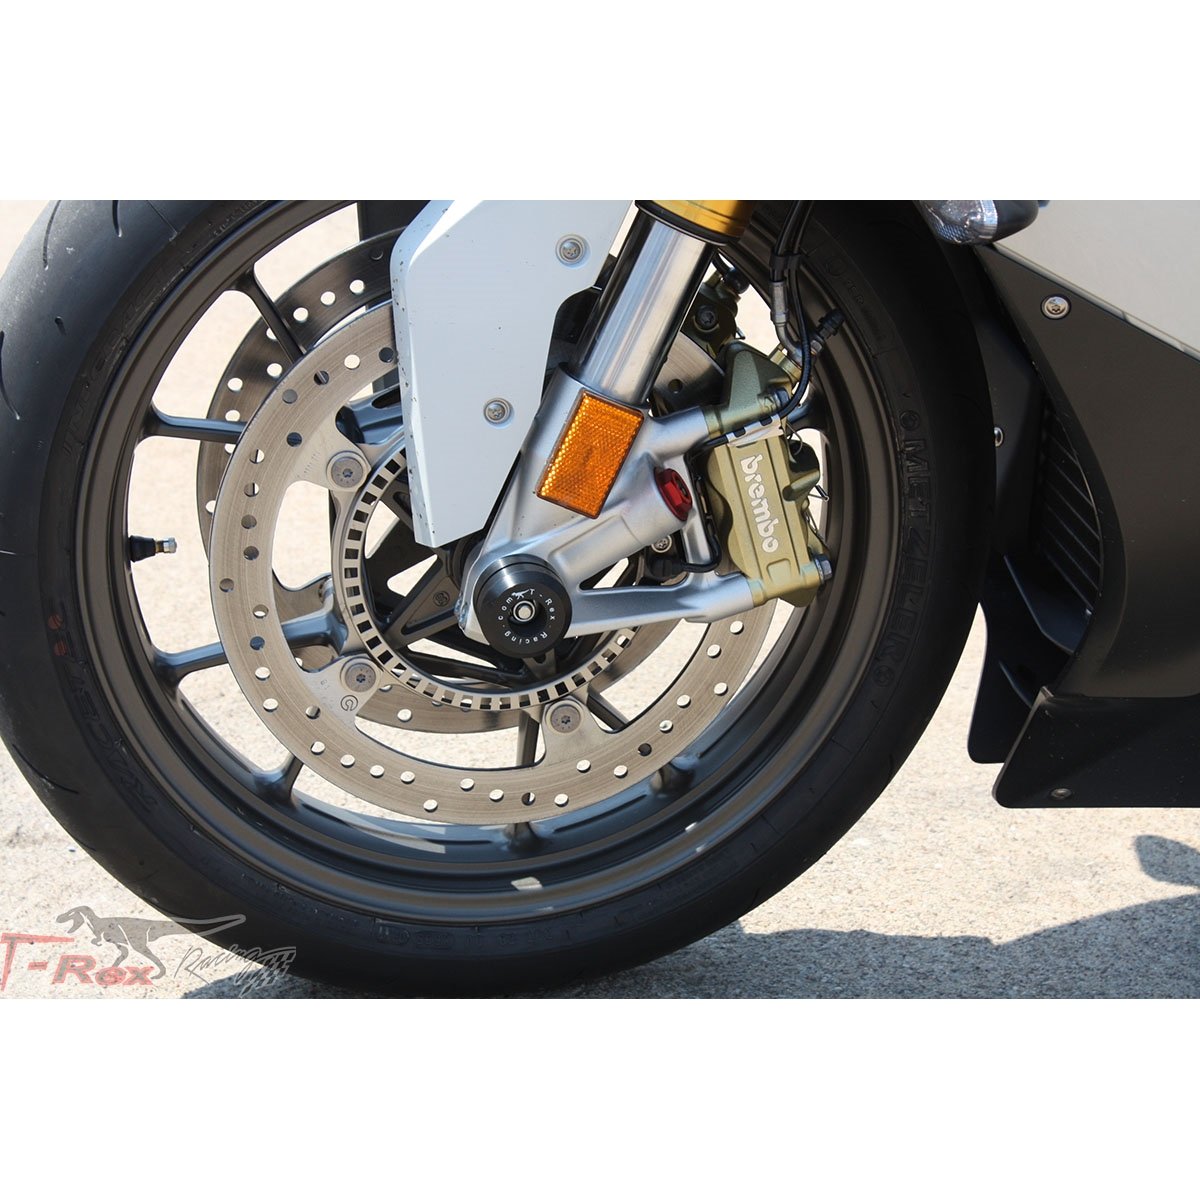 T-rex 2013 - 2014 BMW S1000RR HP4 No Cut Frame Front & Rear Axle Sliders Case Covers Spools